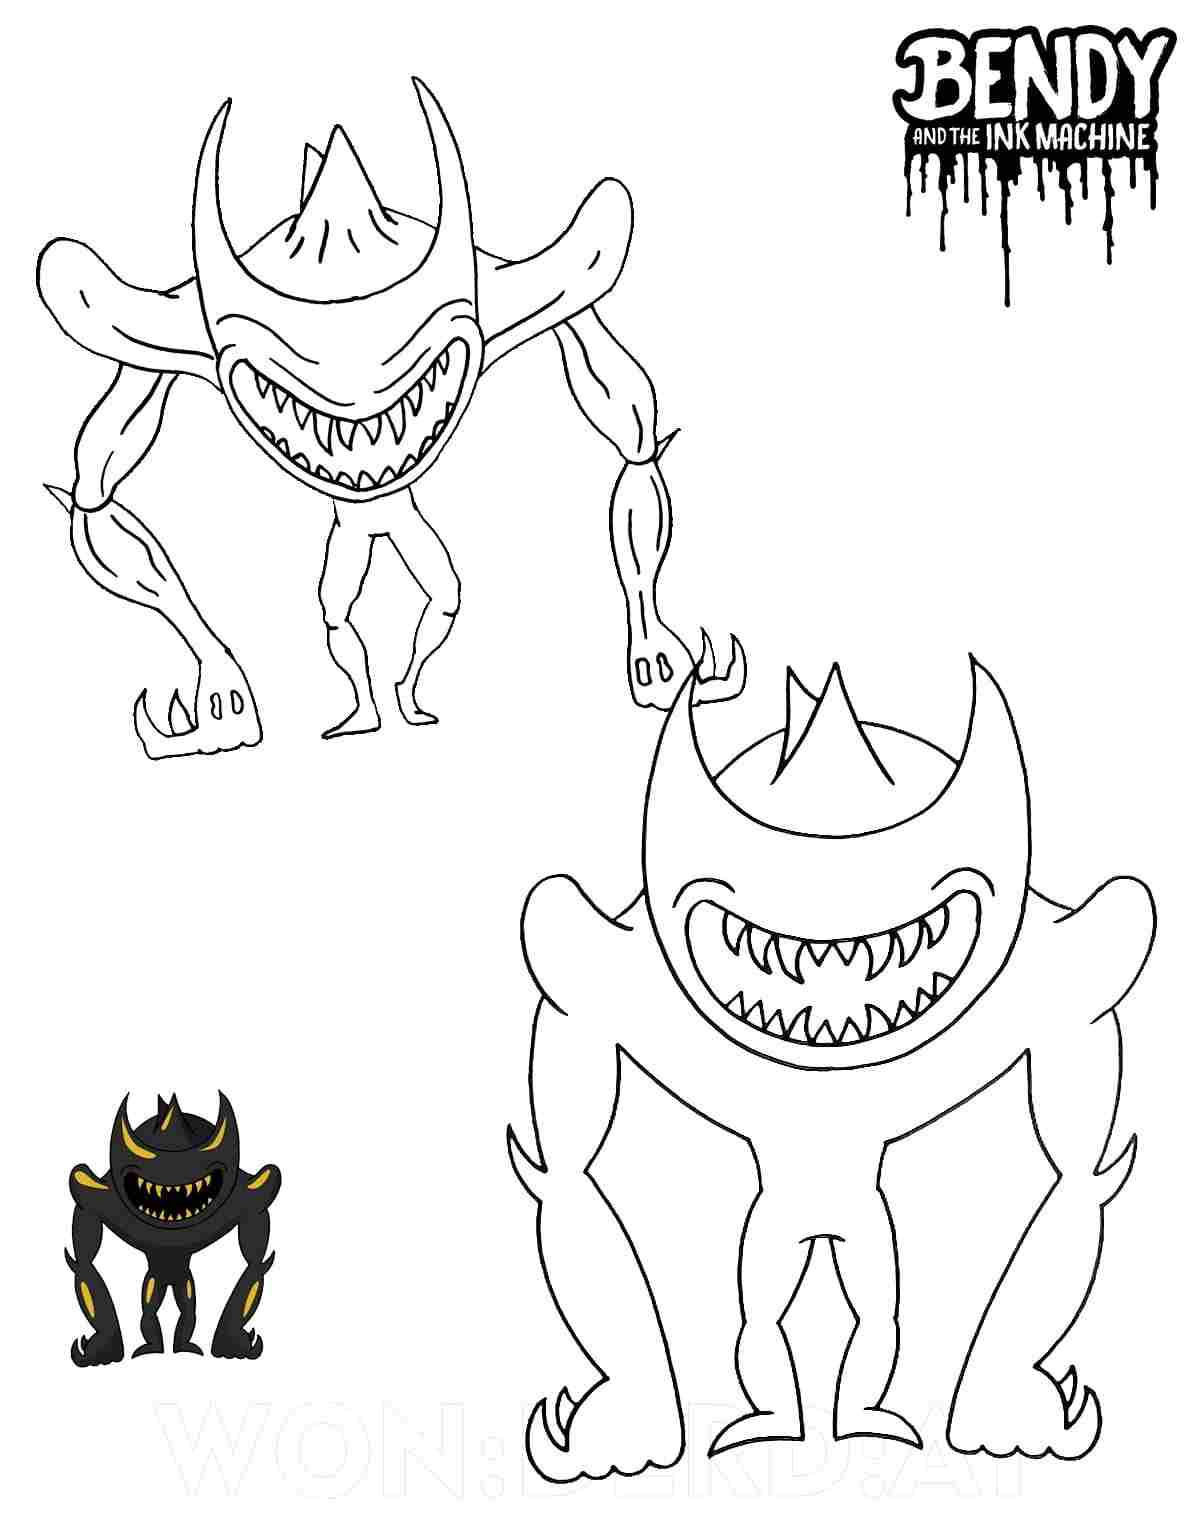 Demon Beast Bendy, the final boss of Bendy and the Ink Machine from Bendy